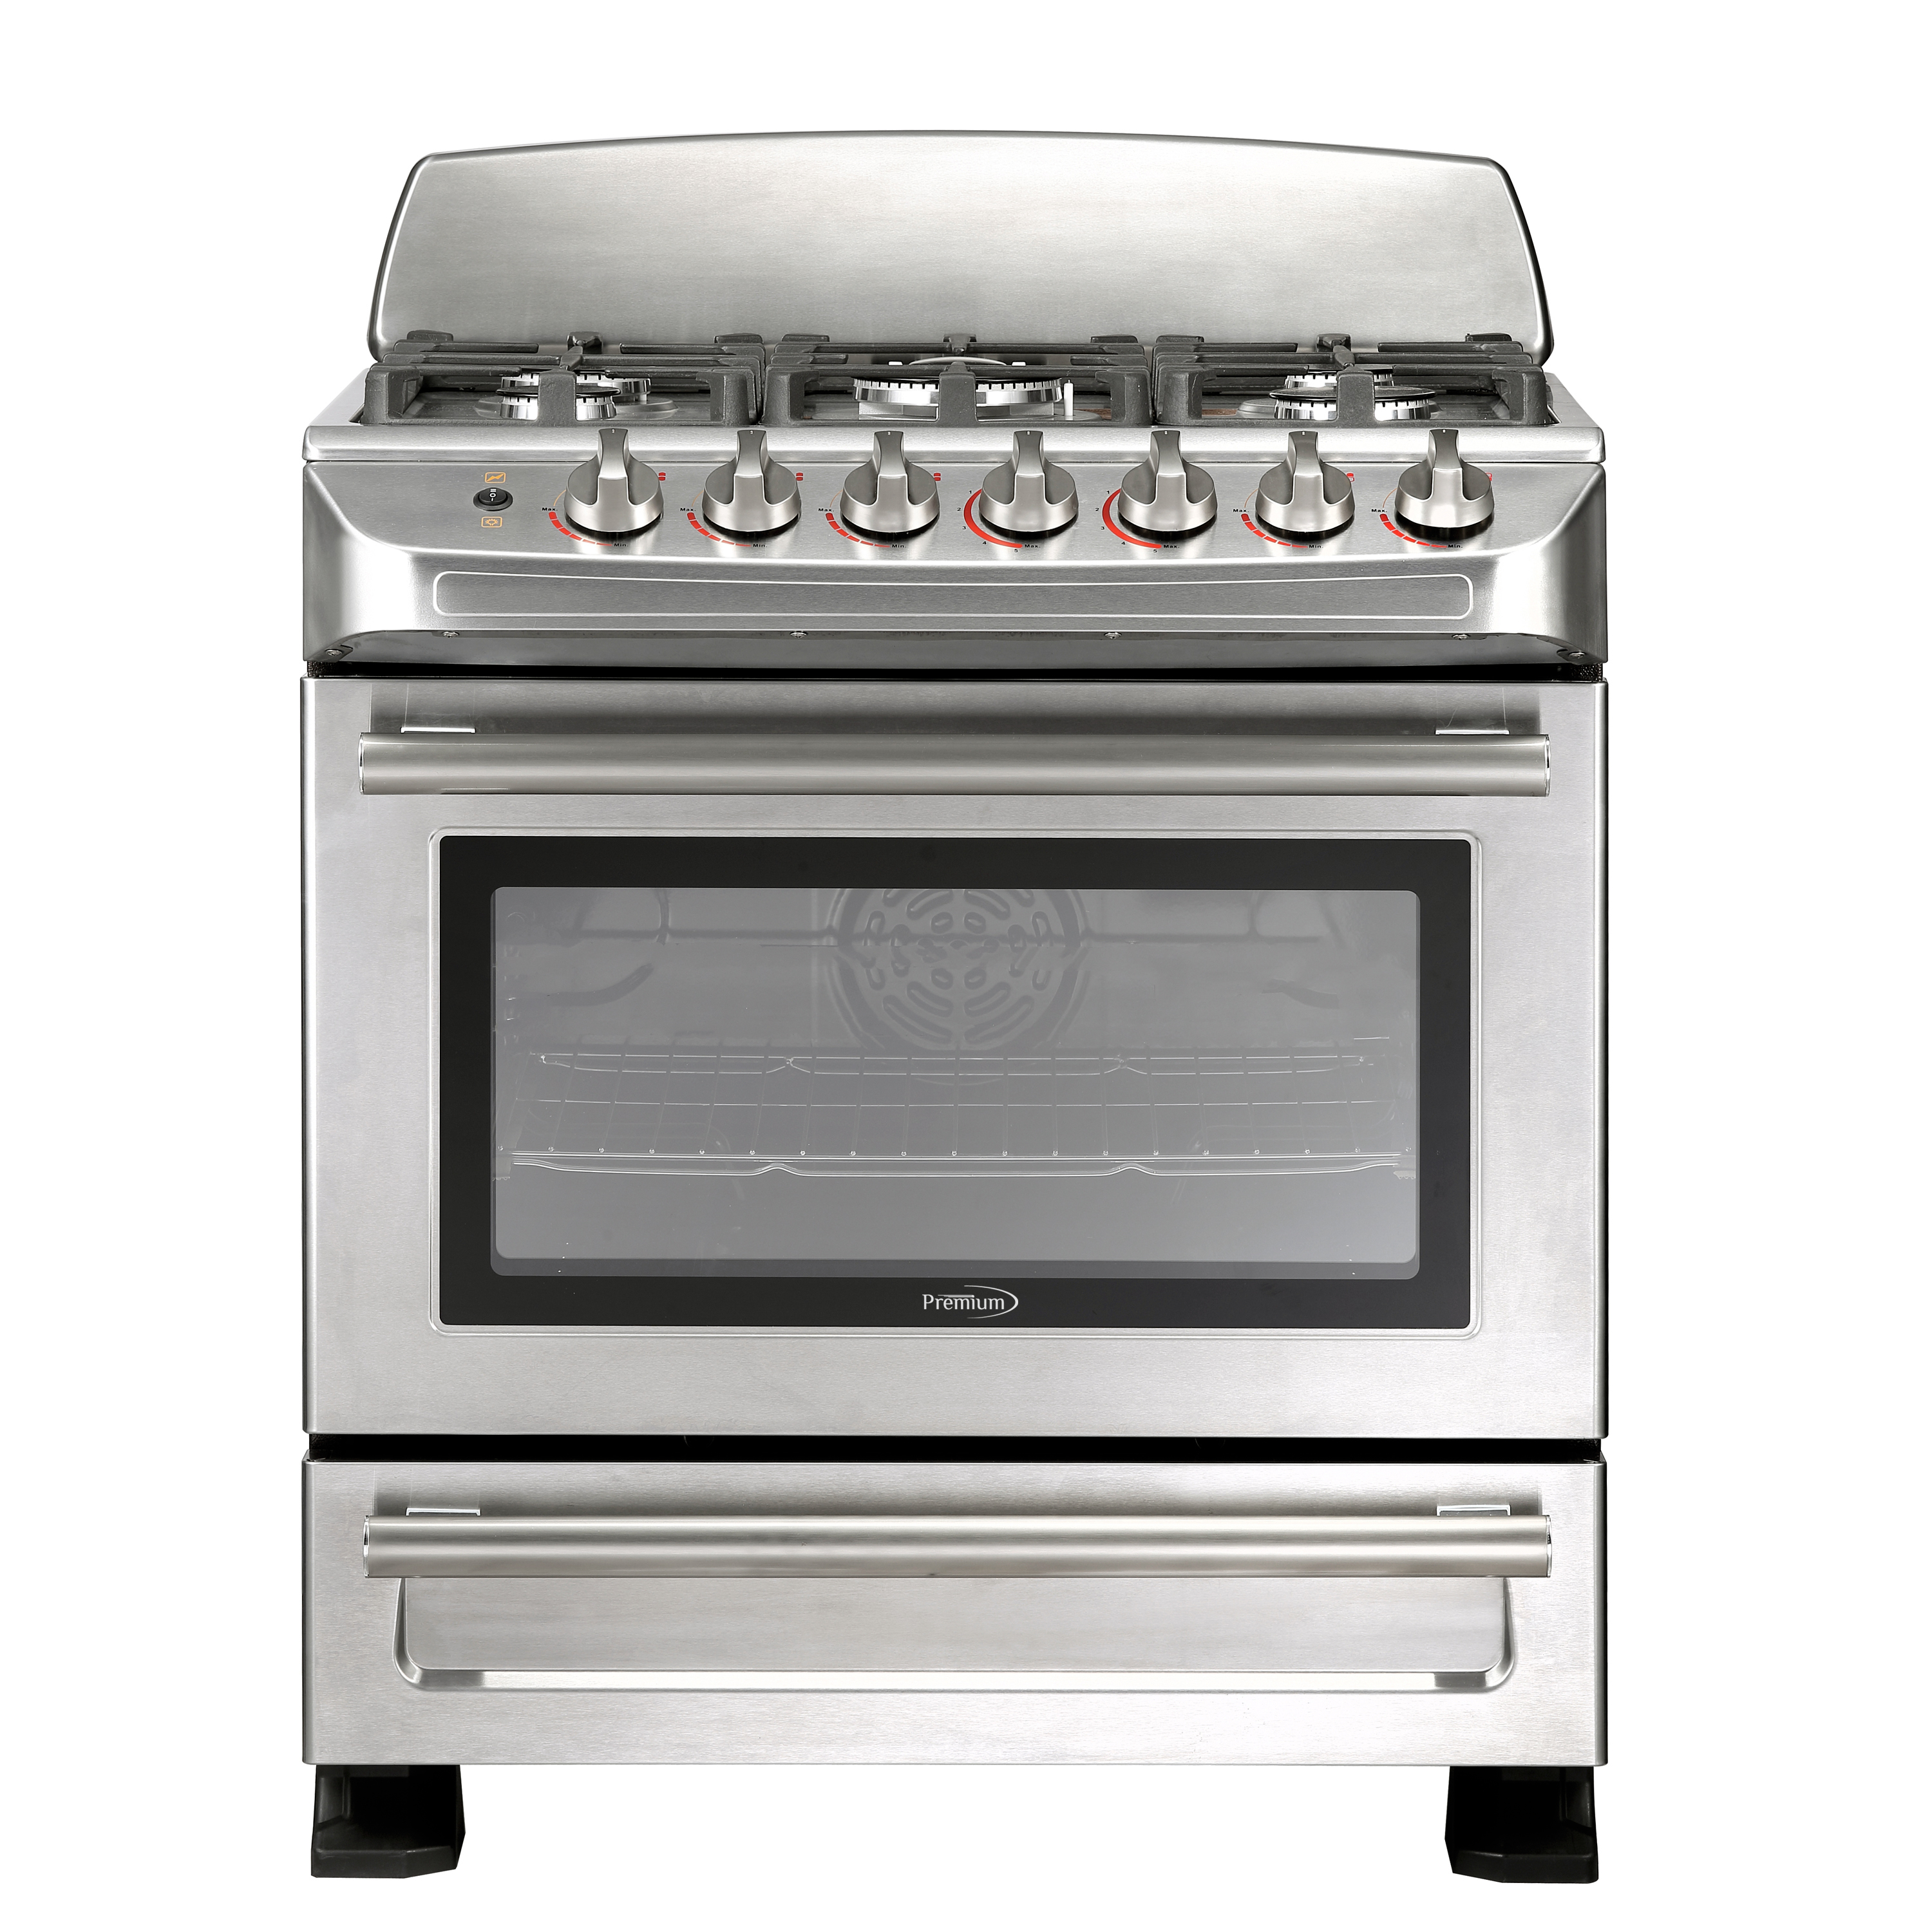 New 5 Burner Gas Stove for Small Space